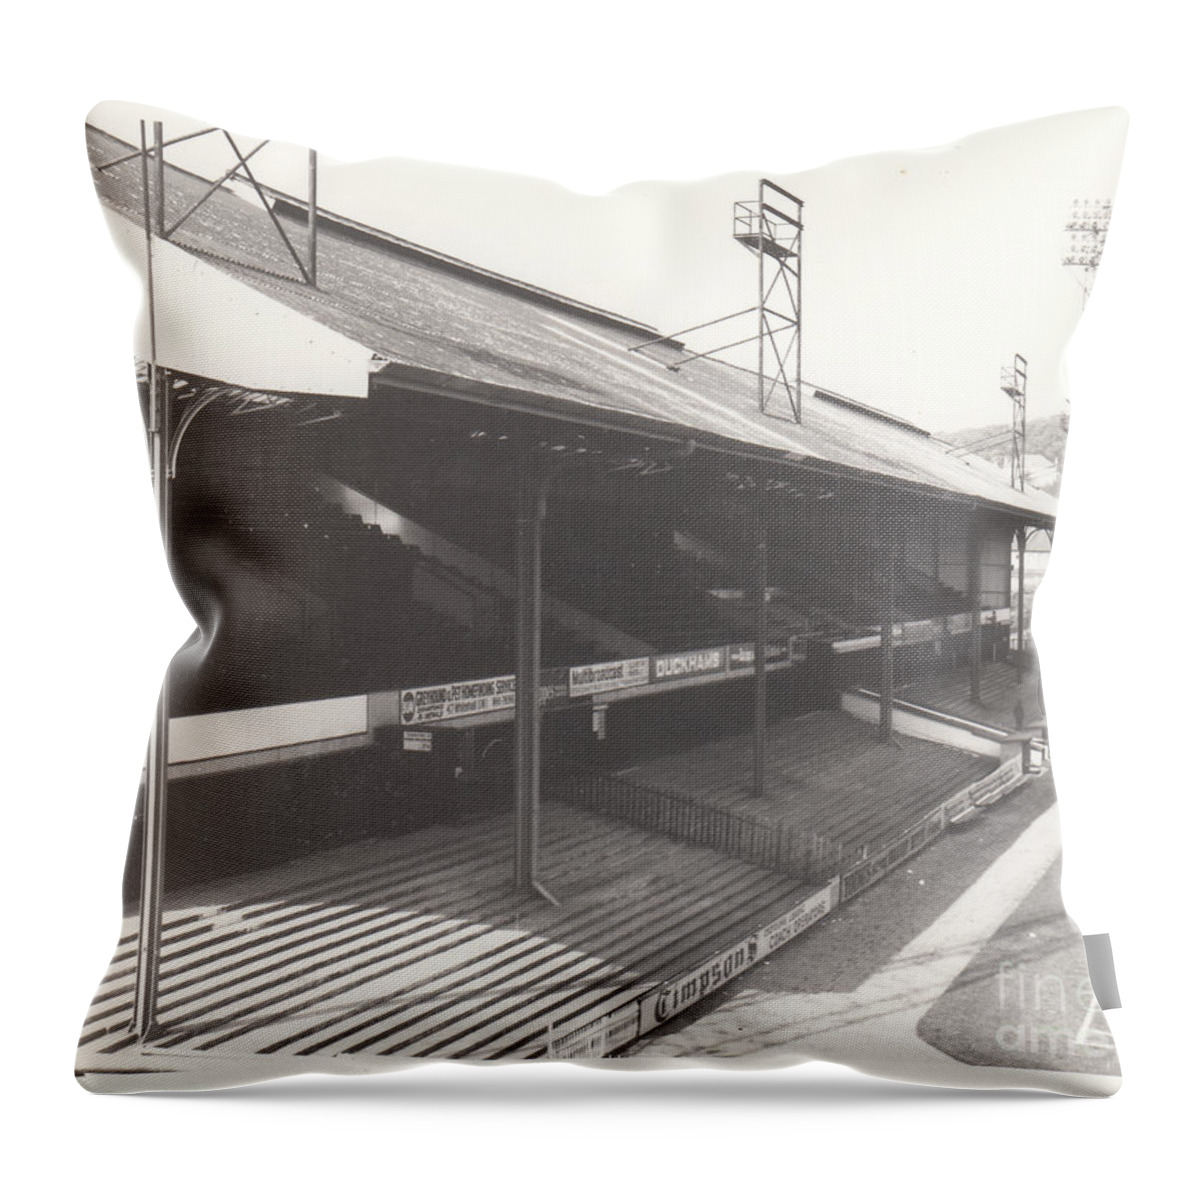 Crystal Palace Throw Pillow featuring the photograph Crystal Palace - Selhurst Park - West Main Stand 1 - August 1969 by Legendary Football Grounds